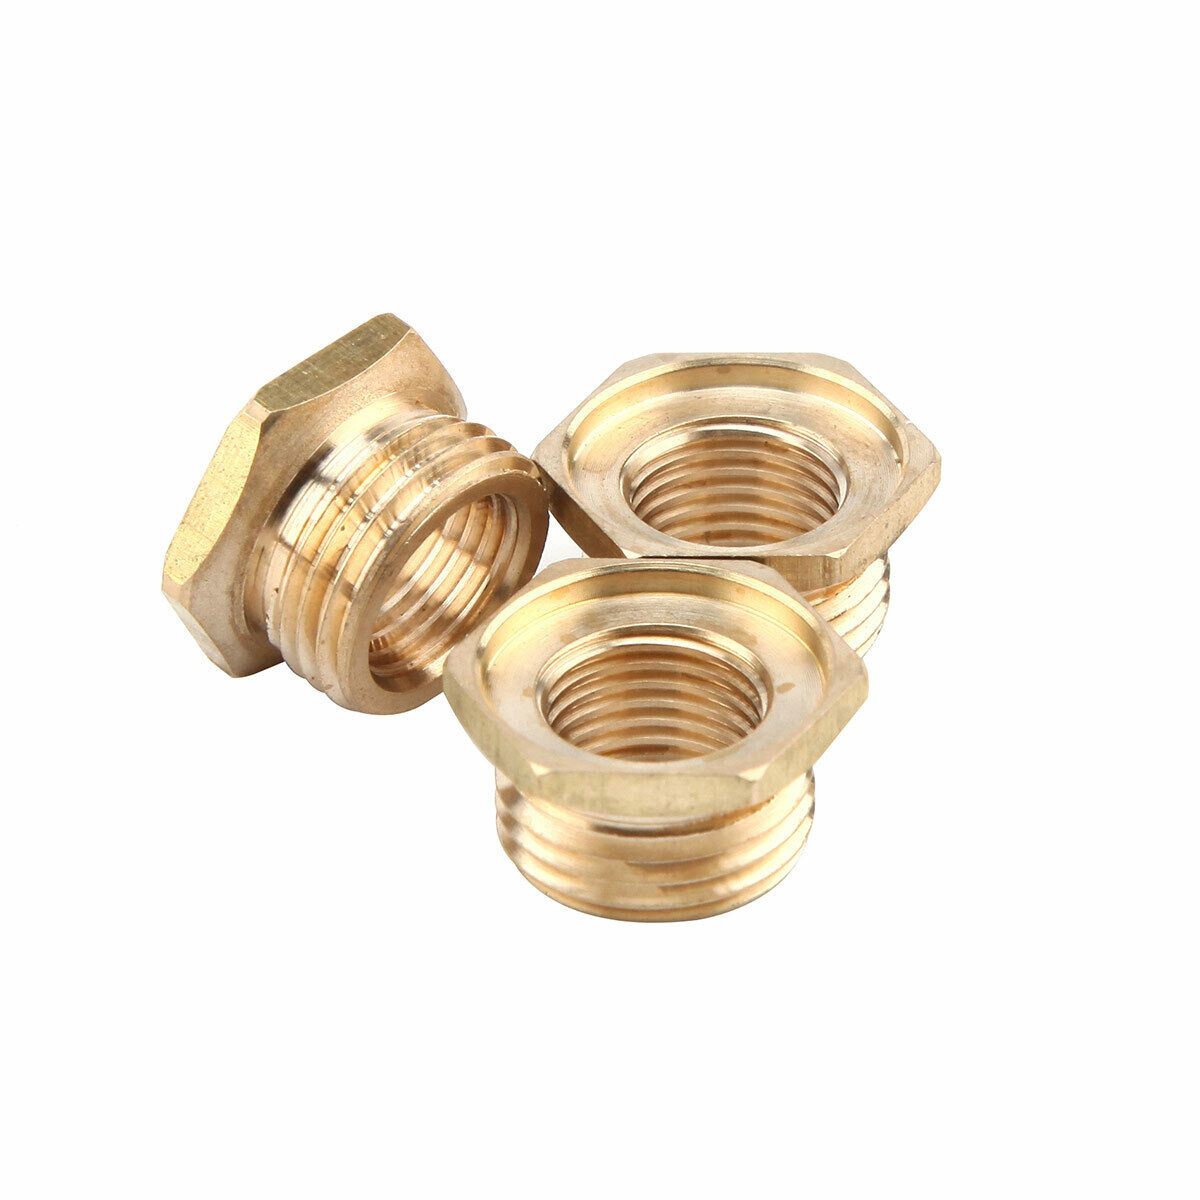 1pc RCEXL 14mm to 10mm Spark Plug Bushing Adapter Copper for RC Model Aircraft